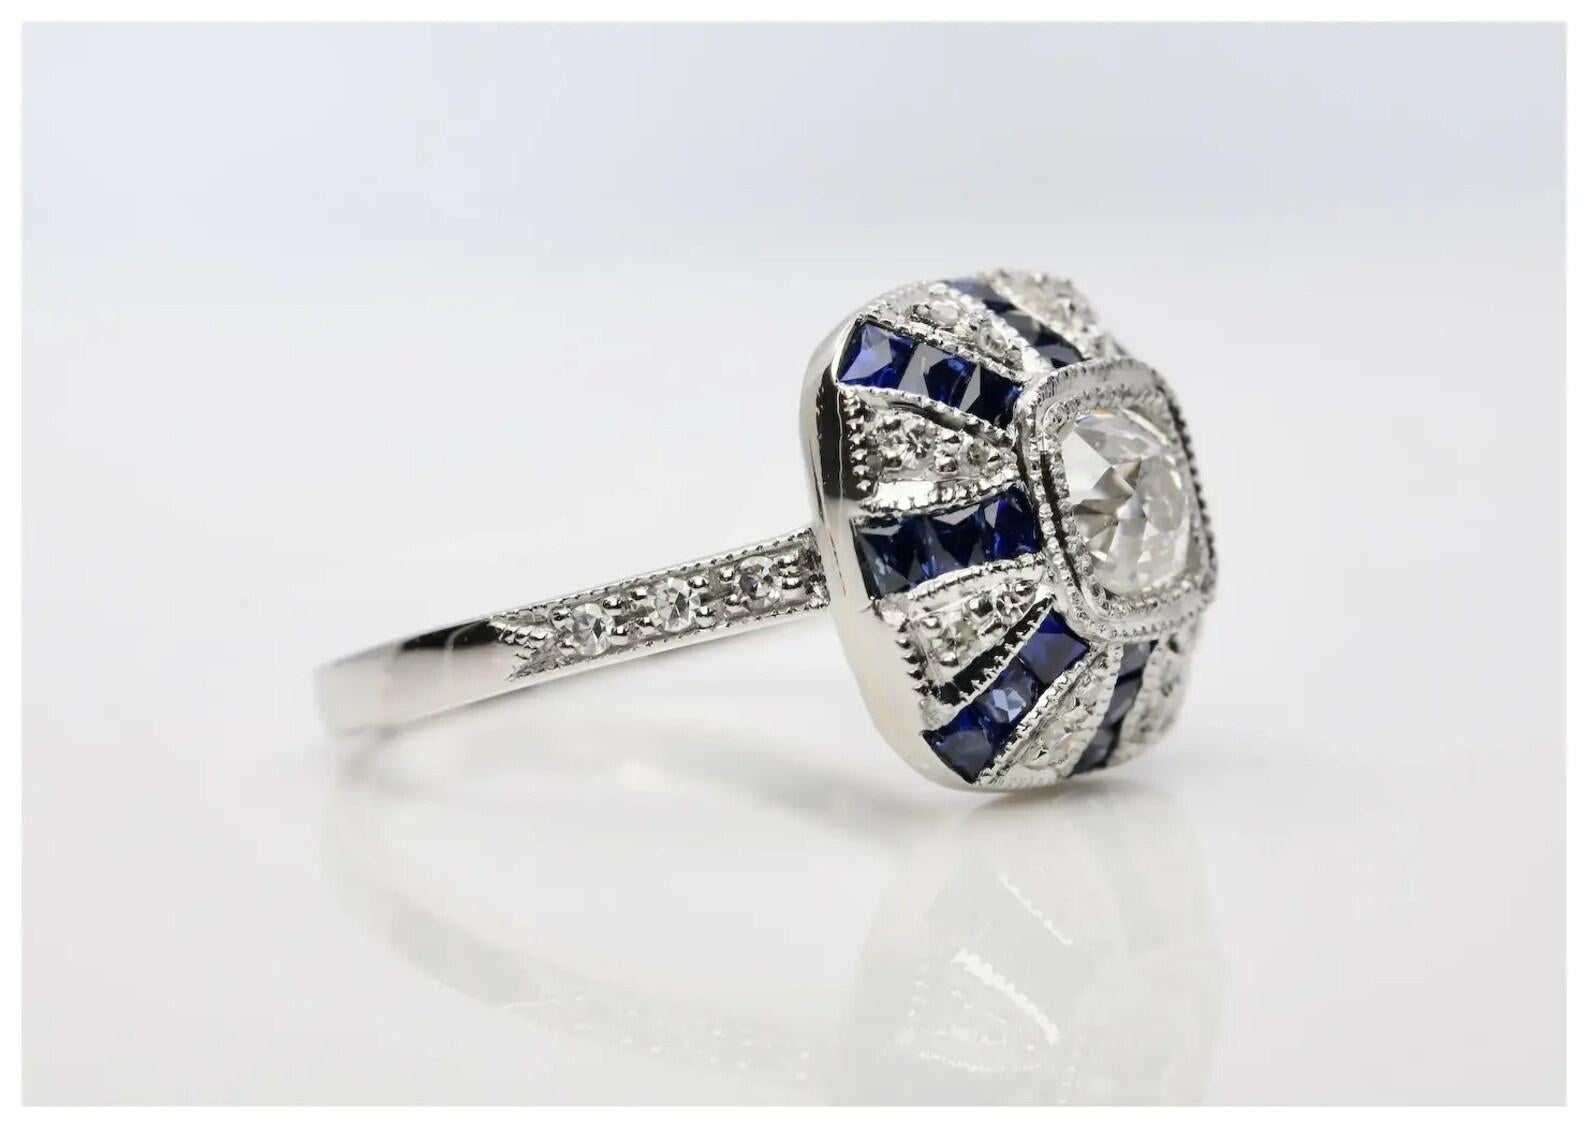 A beautiful and dramatic diamond, and French cut sapphire ring in platinum.

Centered by a 0.60 carat old mine cut cushion shaped diamond of H color, VS2 clarity set in a miligrained platinum bezel.

Framed by rays set with 24 French cut sapphires